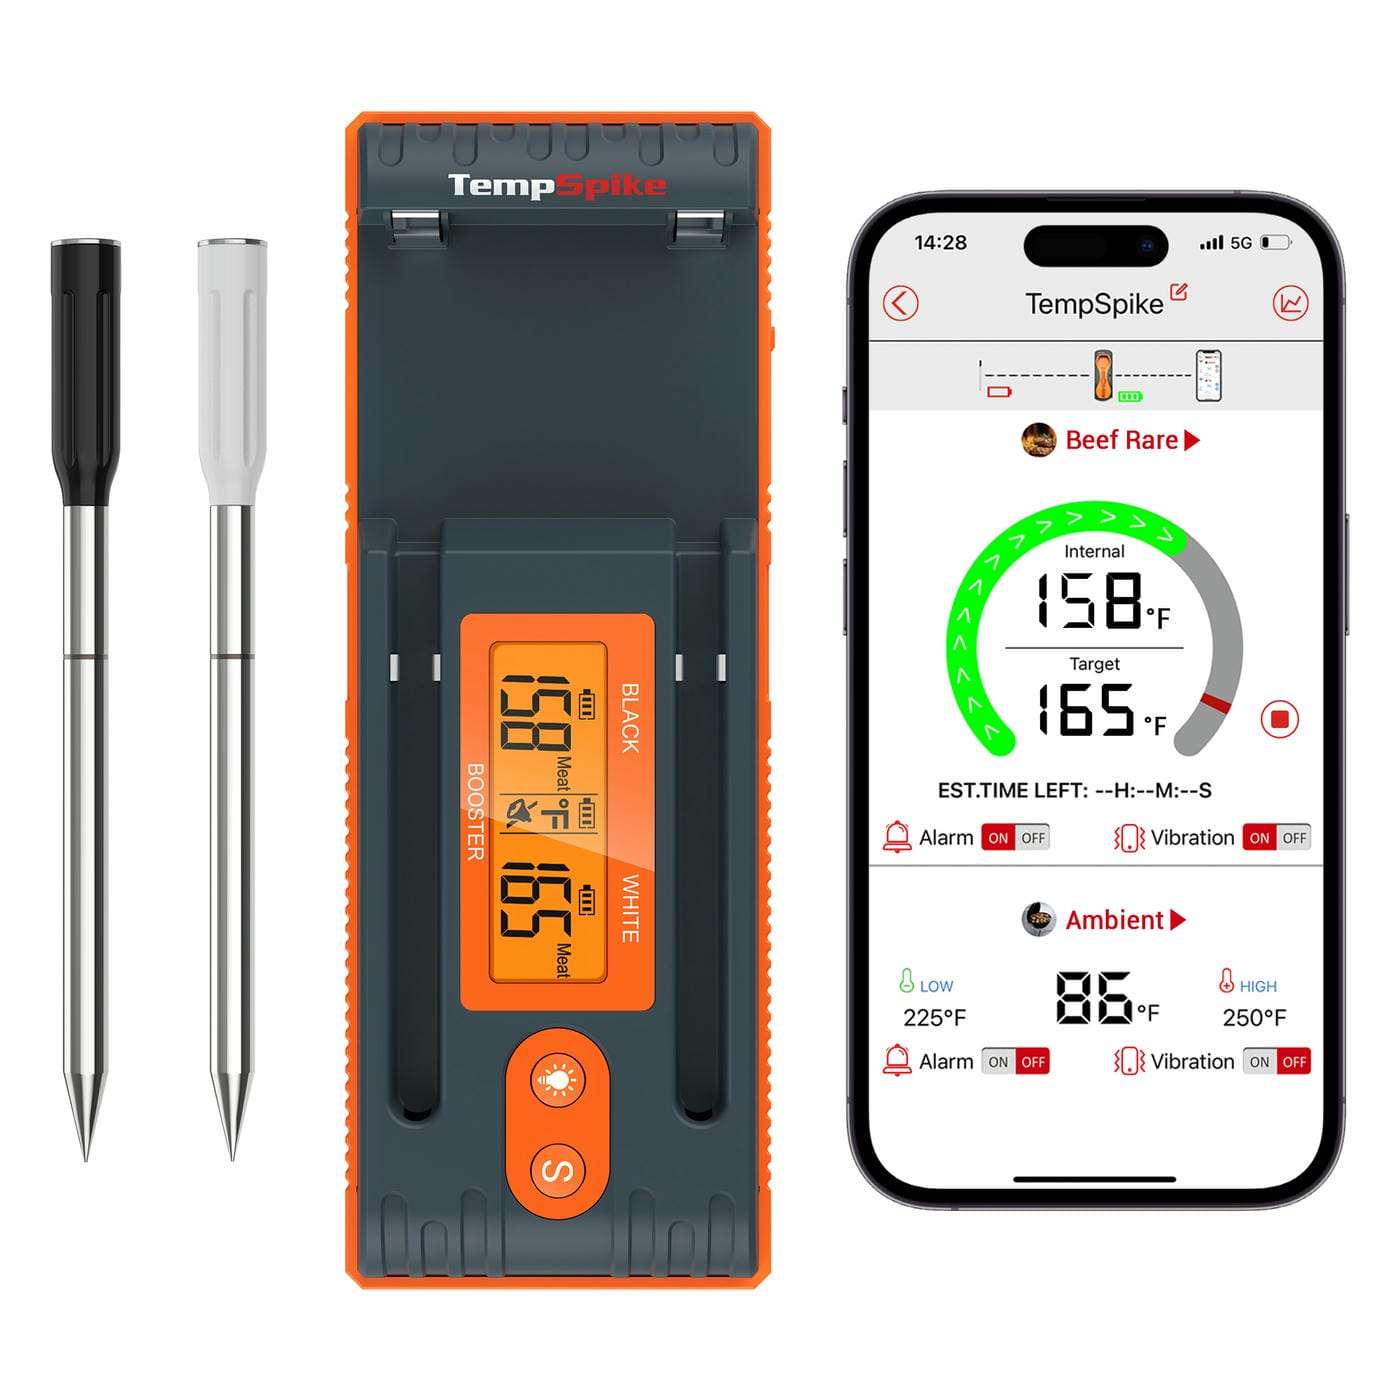 ThermoPro TP960 TempSpike Truly Wireless Bluetooth Meat